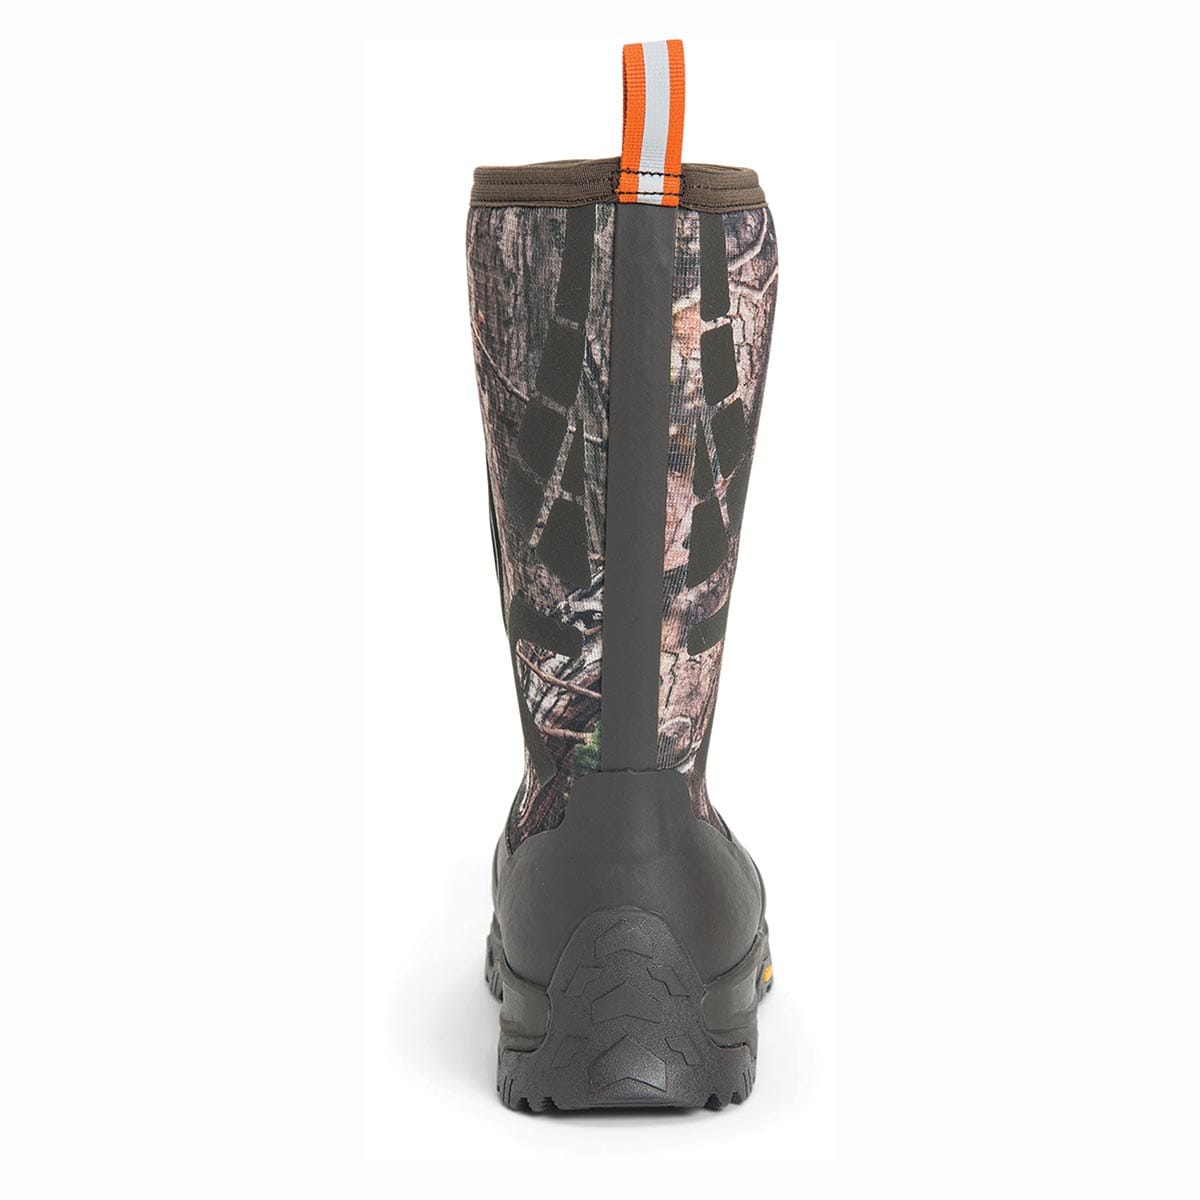 Muck Boot Co. Apex Pro Artic Grip A.T. Traction Lug Boots